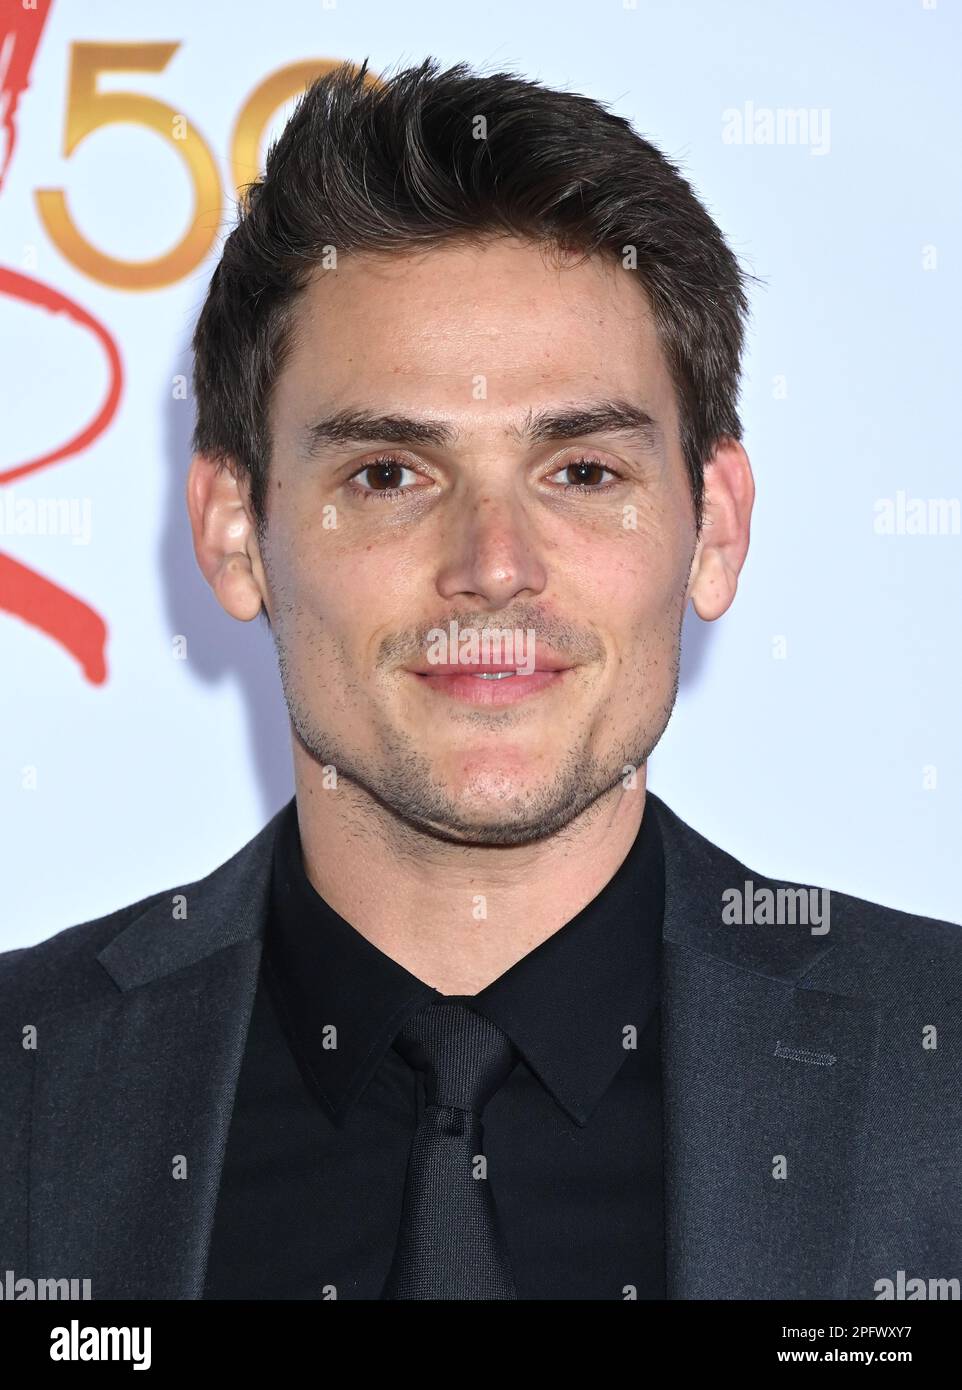 Mark Grossman arriving at the 50th Anniversary of The Young and The